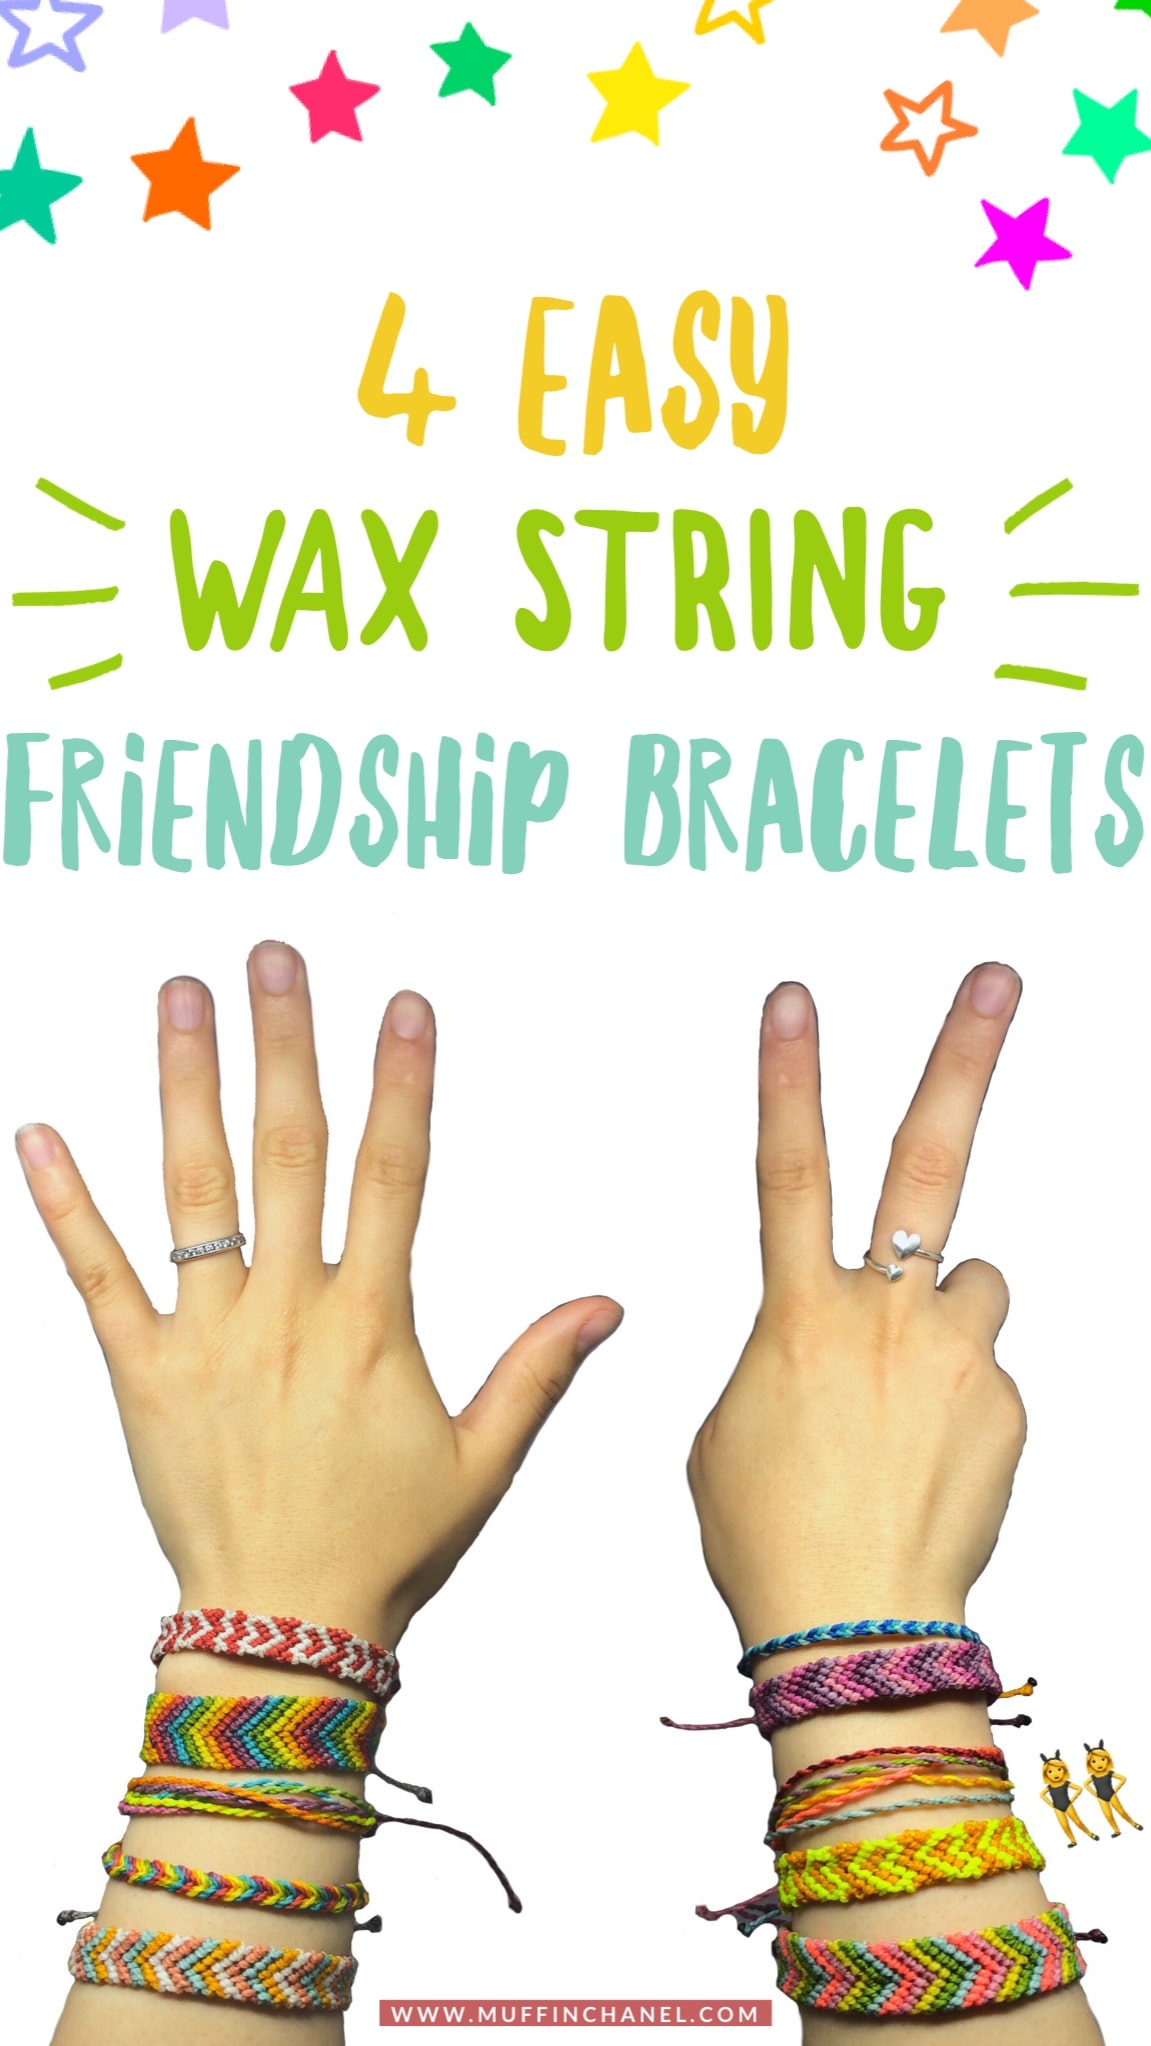 Easy Friendship Bracelets For Kids to Make Themselves | Rediscovered  Families